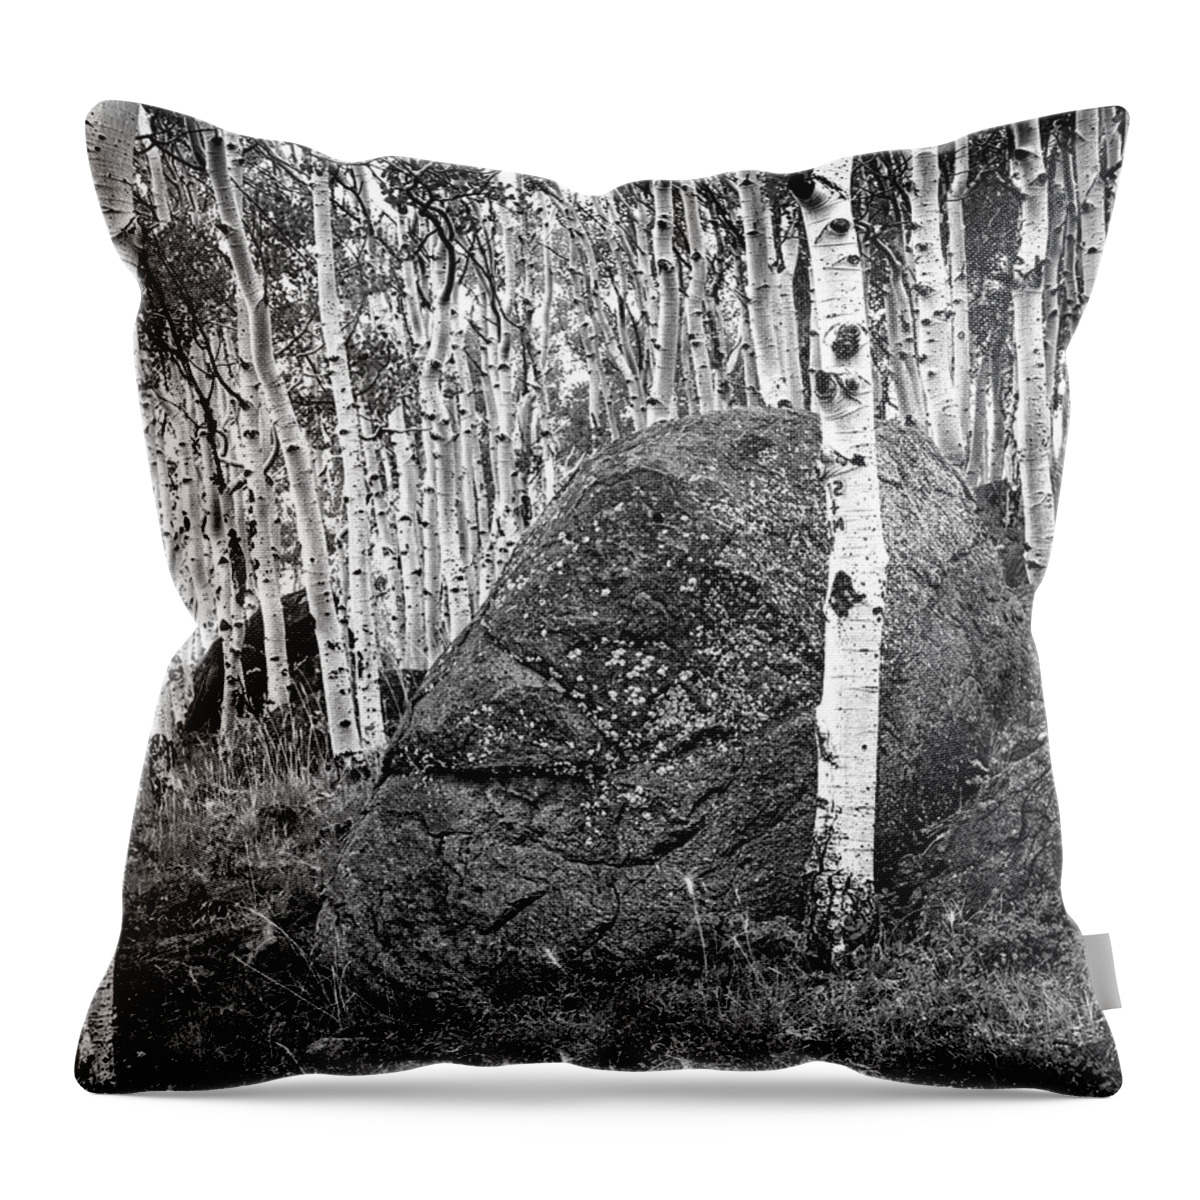 Aspens Throw Pillow featuring the photograph Aspen Stand Boulder Utah X101 by Rich Franco